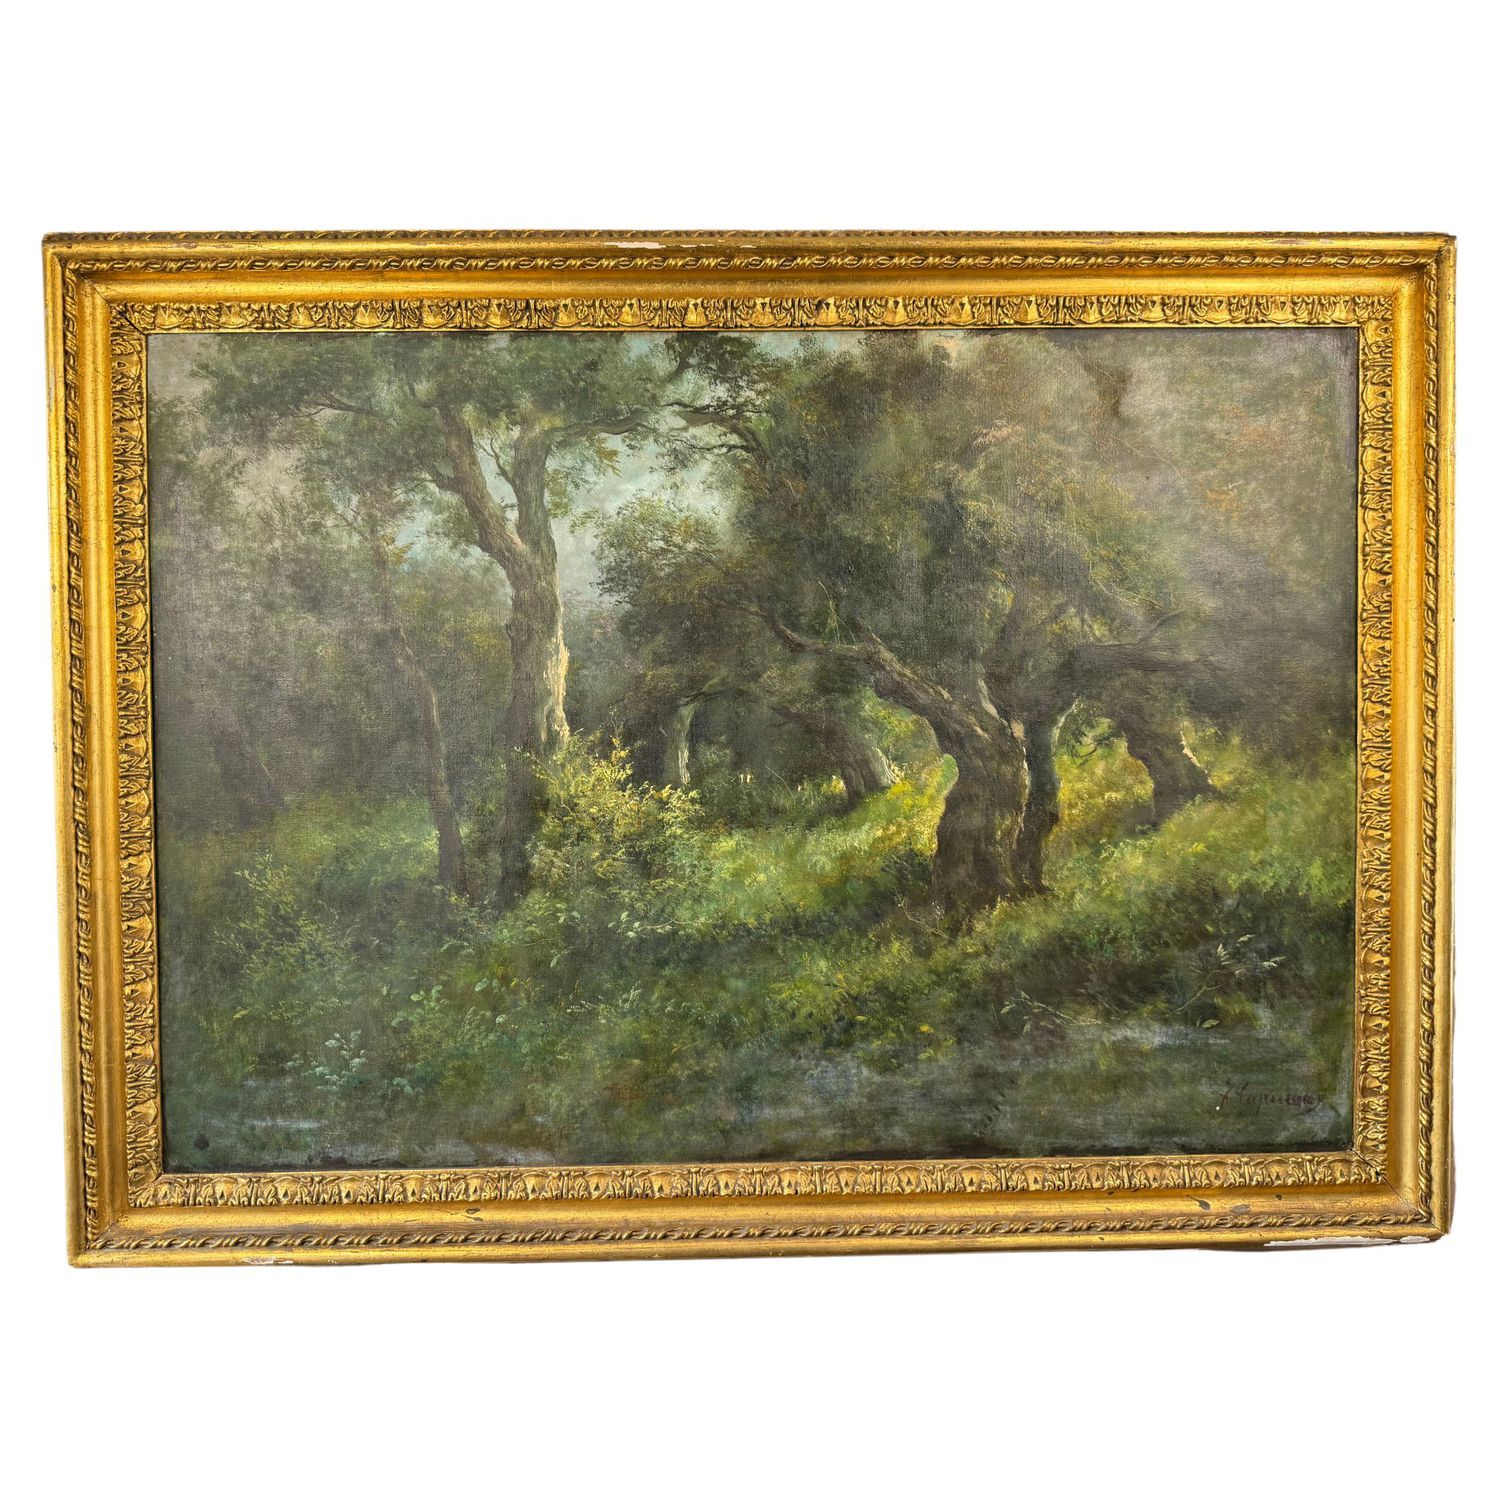 Wooded forest - F. Capuano (1854 - 1908)